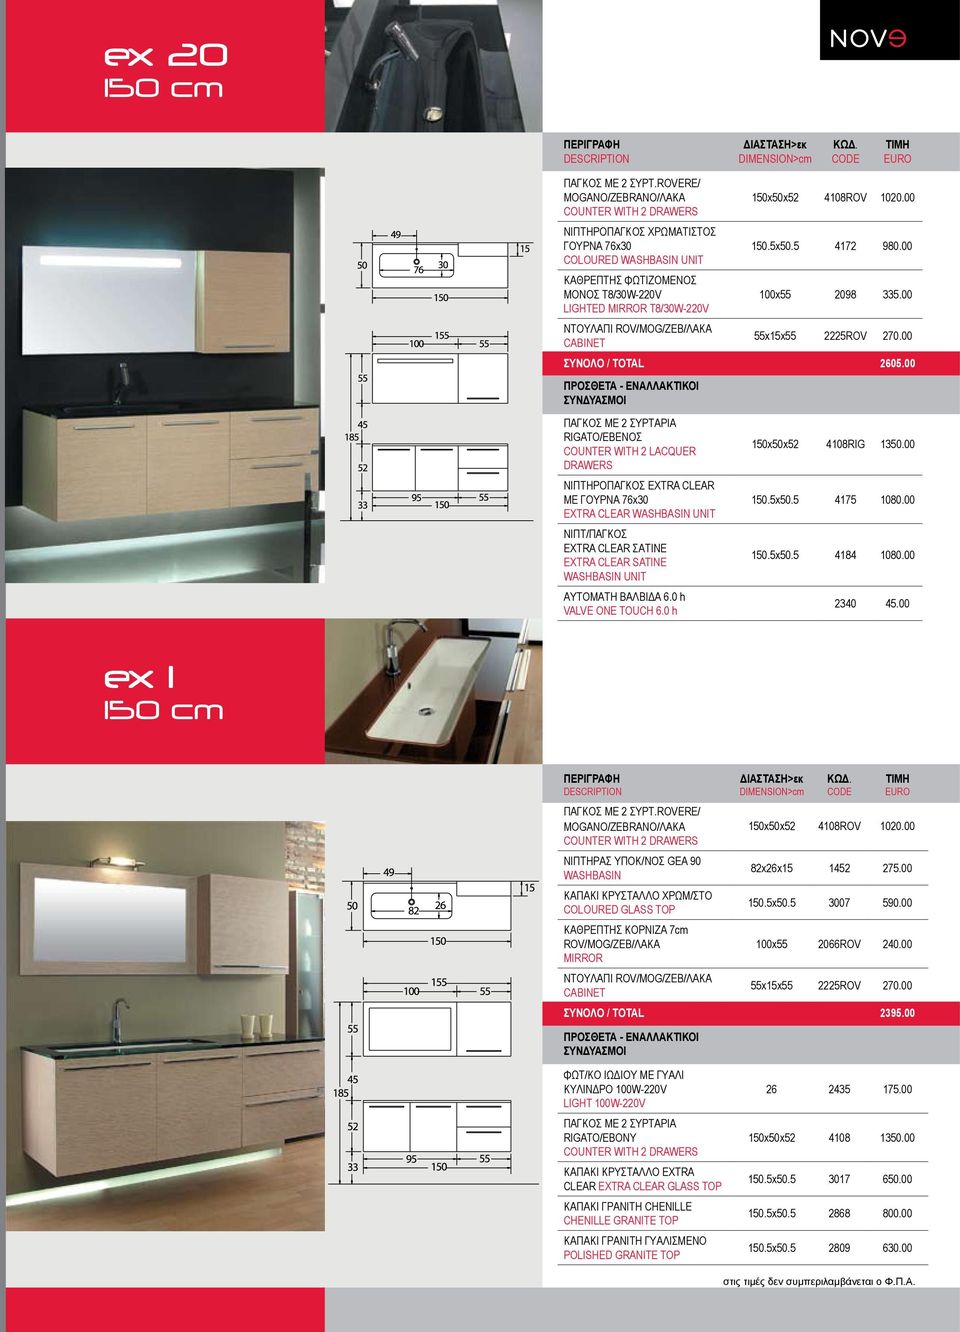 00 RIGATO/ΕΒΕΝΟΣ WITH 2 LACQUER DRAWERS ΝΙΠΤΗΡΟΠΑΓΚΟΣ EXTRA CLEAR ΜΕ EXTRA CLEAR UNIT ΝΙΠΤ/ΠΑΓΚΟΣ EXTRA CLEAR ΣΑΤΙΝΕ EXTRA CLEAR SATINE UNIT 150x50x52 4108RIG 1350.00 150.5x50.5 4175 1080.00 150.5x50.5 4184 1080.